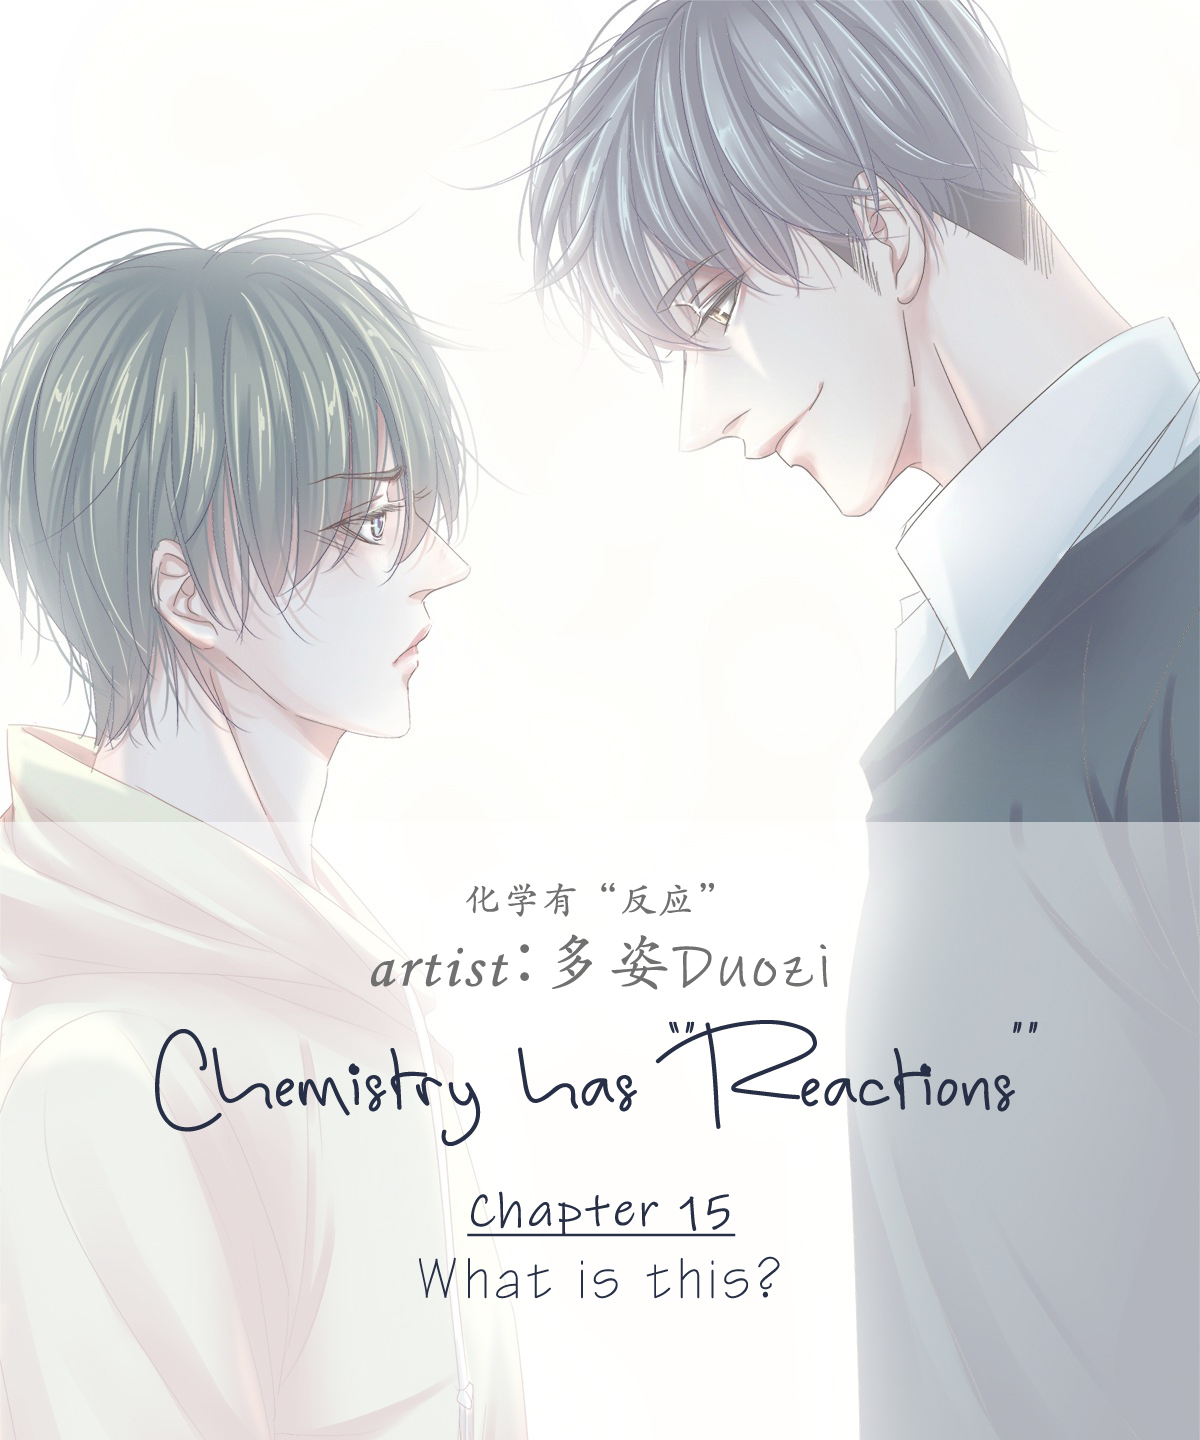 Chemistry has "Reactions" Vol. 1 Ch. 15